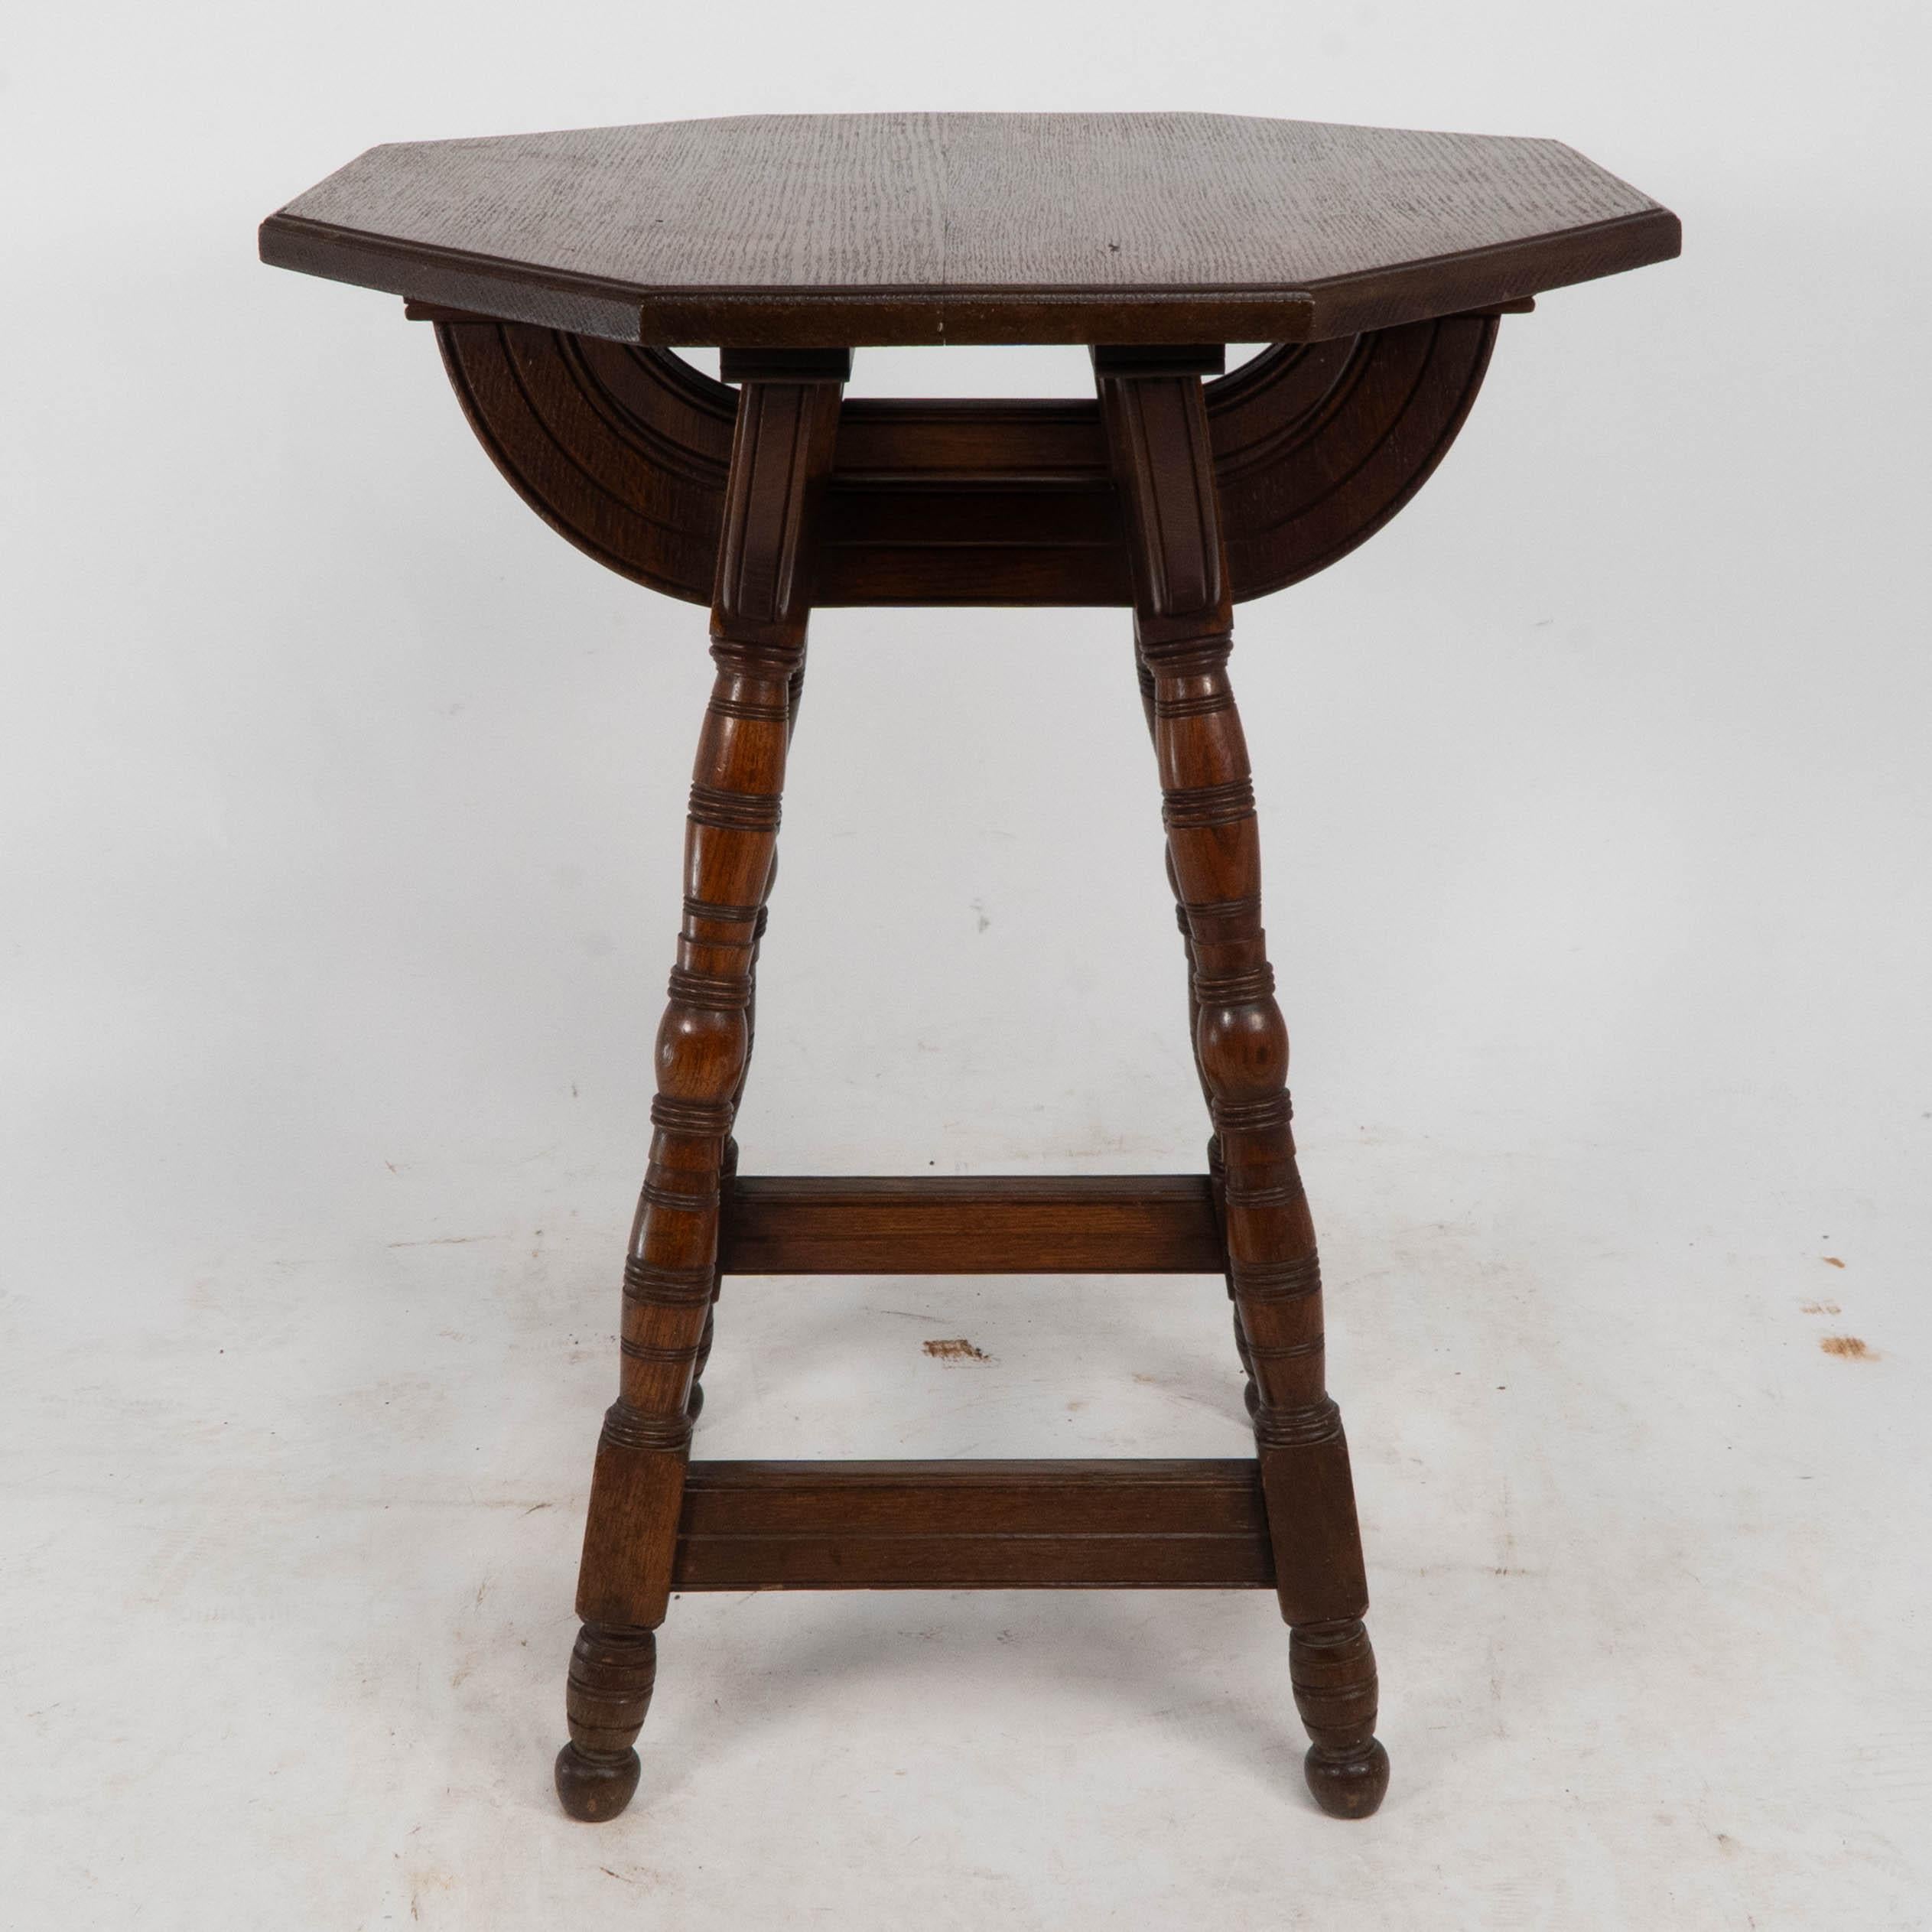 Collier and Plucknett. A rare Gothic Revival oak side table In Good Condition For Sale In London, GB